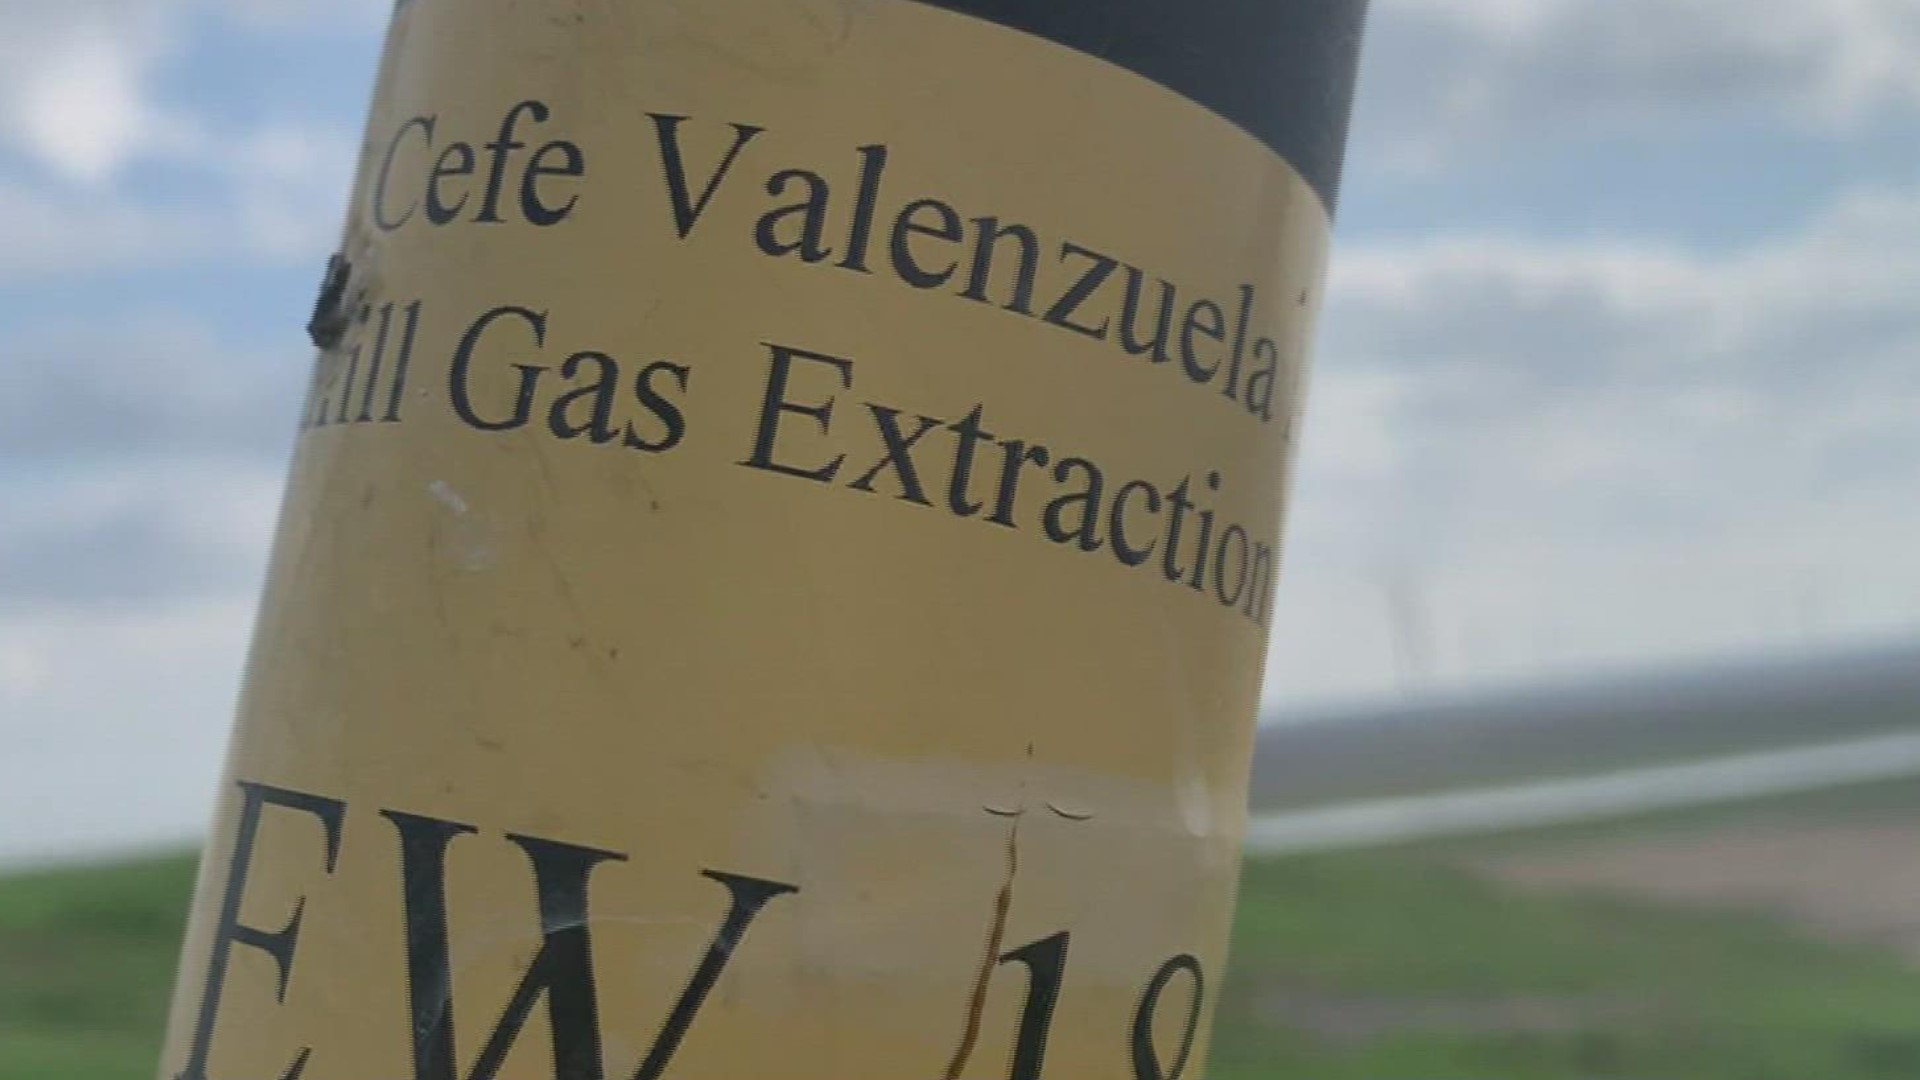 Corpus Christi City Council will be asked on Dec. 20, to sign off on a 40-year lease for a company to come in and build a gas plant at the Cefe Valenzuela Landfill.